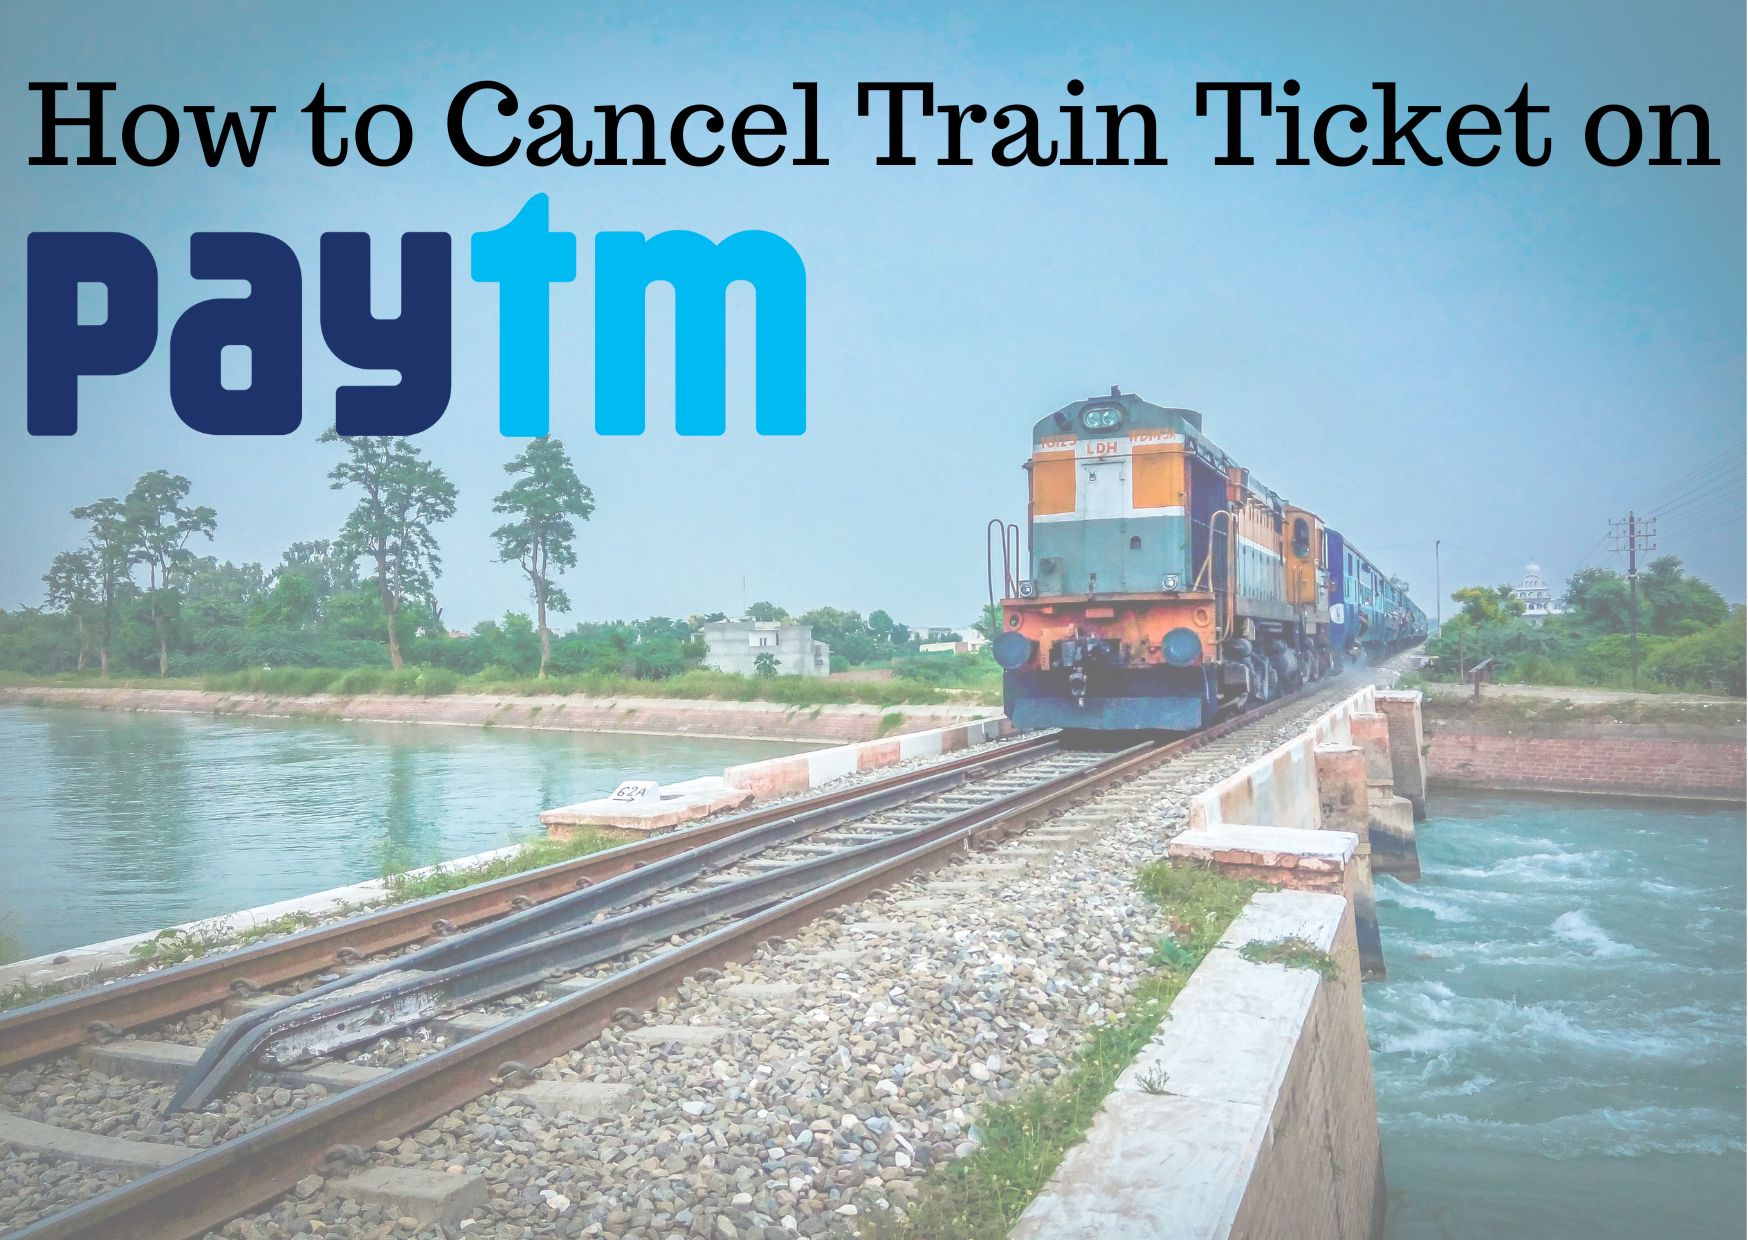 How to Cancel Train Ticket on Paytm?